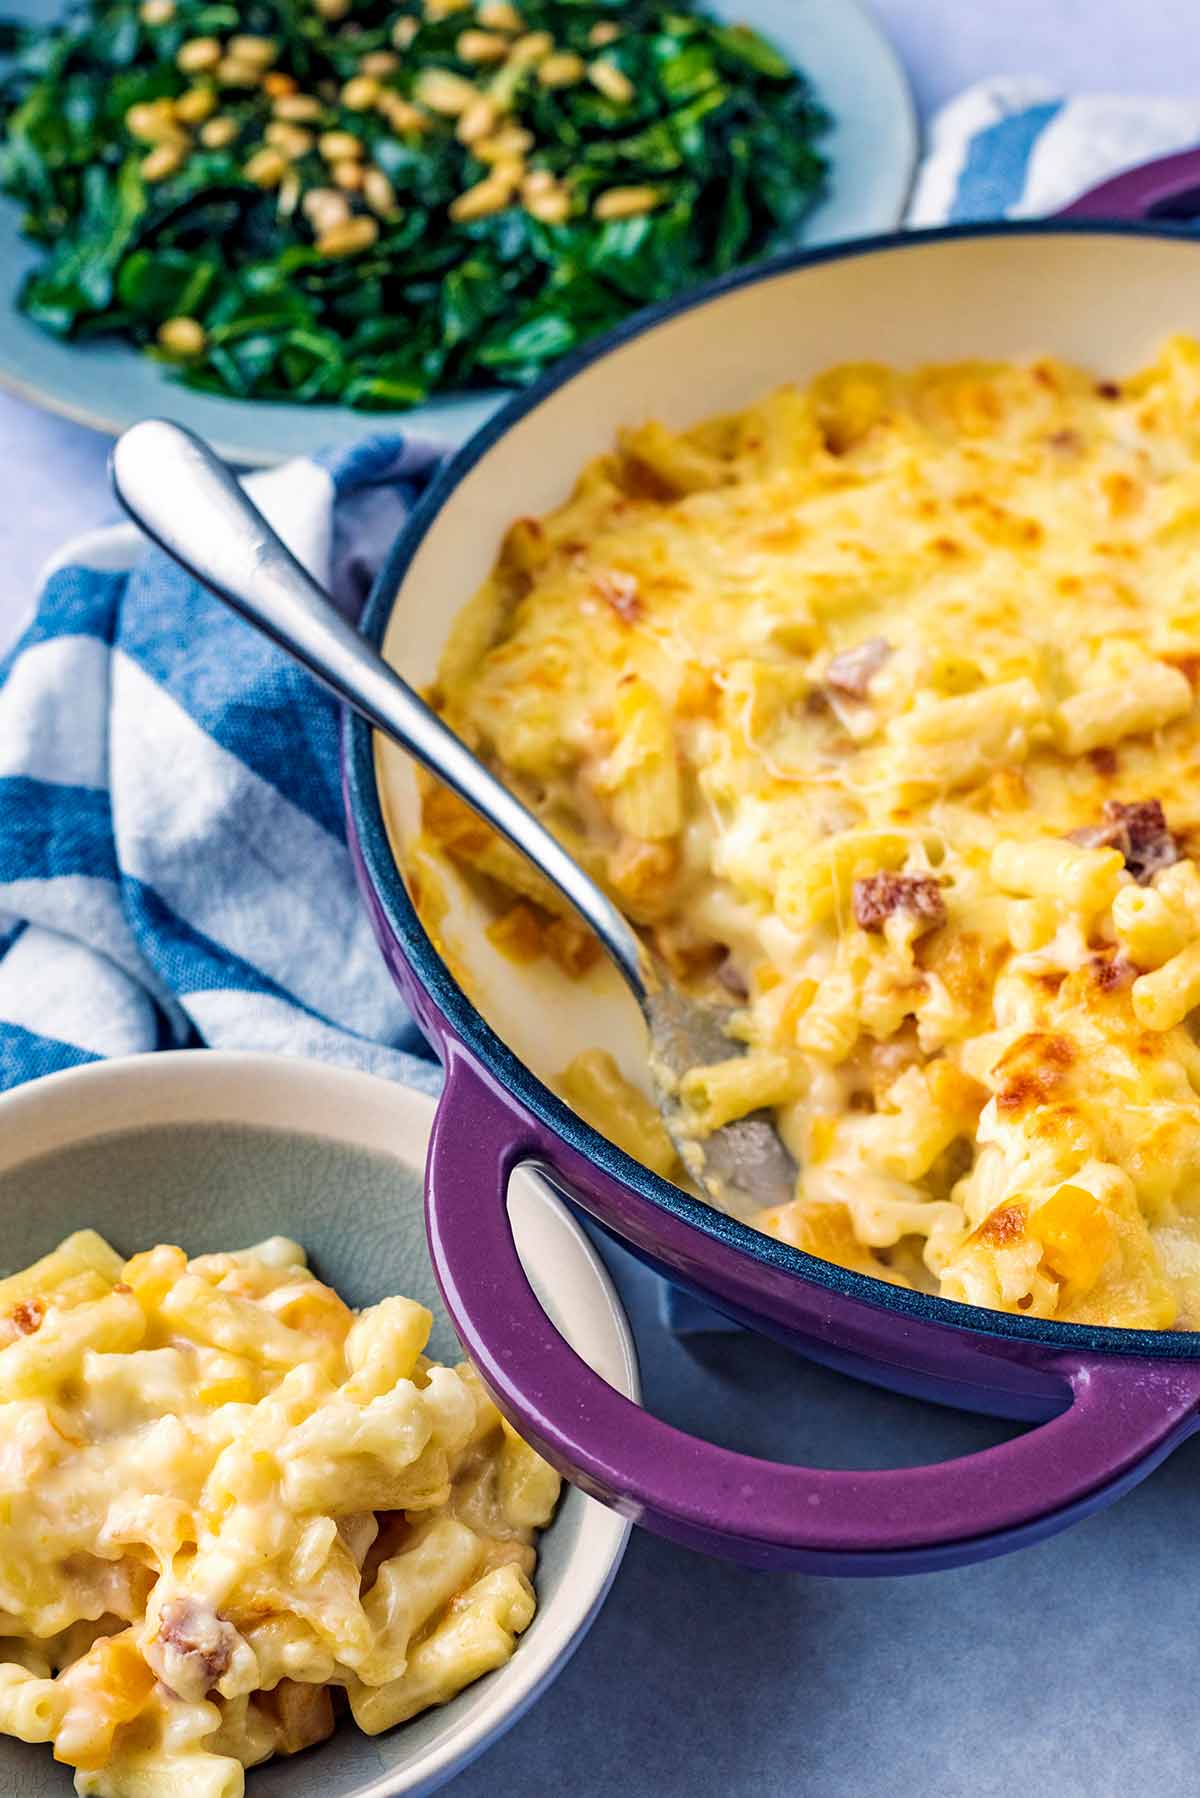 A baking dish full of macaroni cheese in front of a bowl of greens.